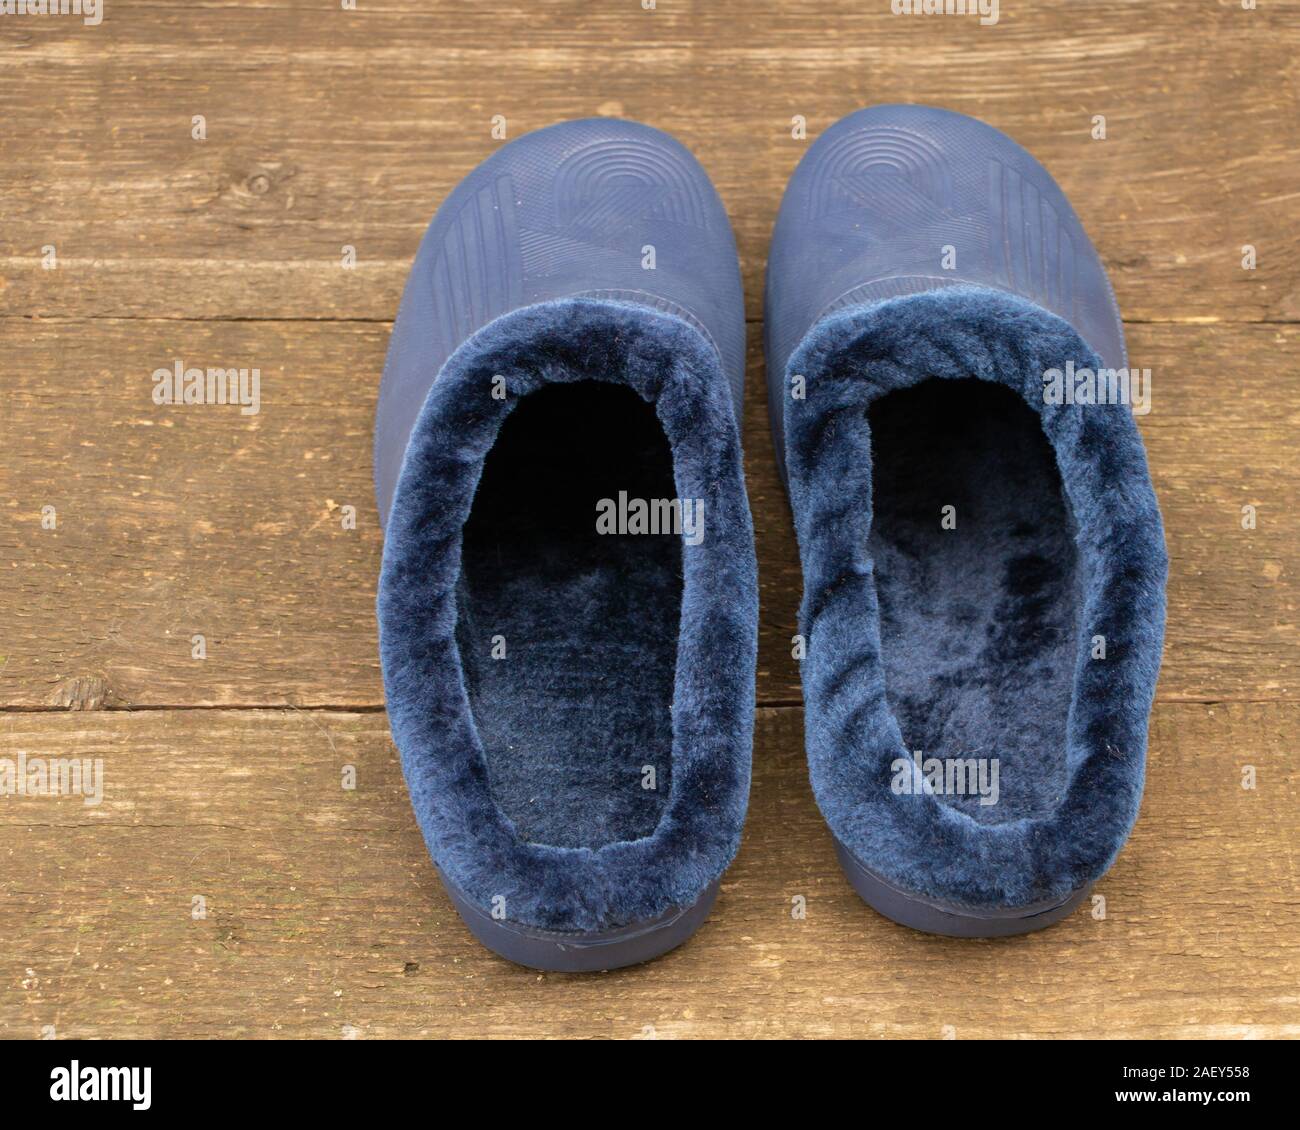 Winter shoes with warm fur inside, for wearing around the house Stock Photo  - Alamy